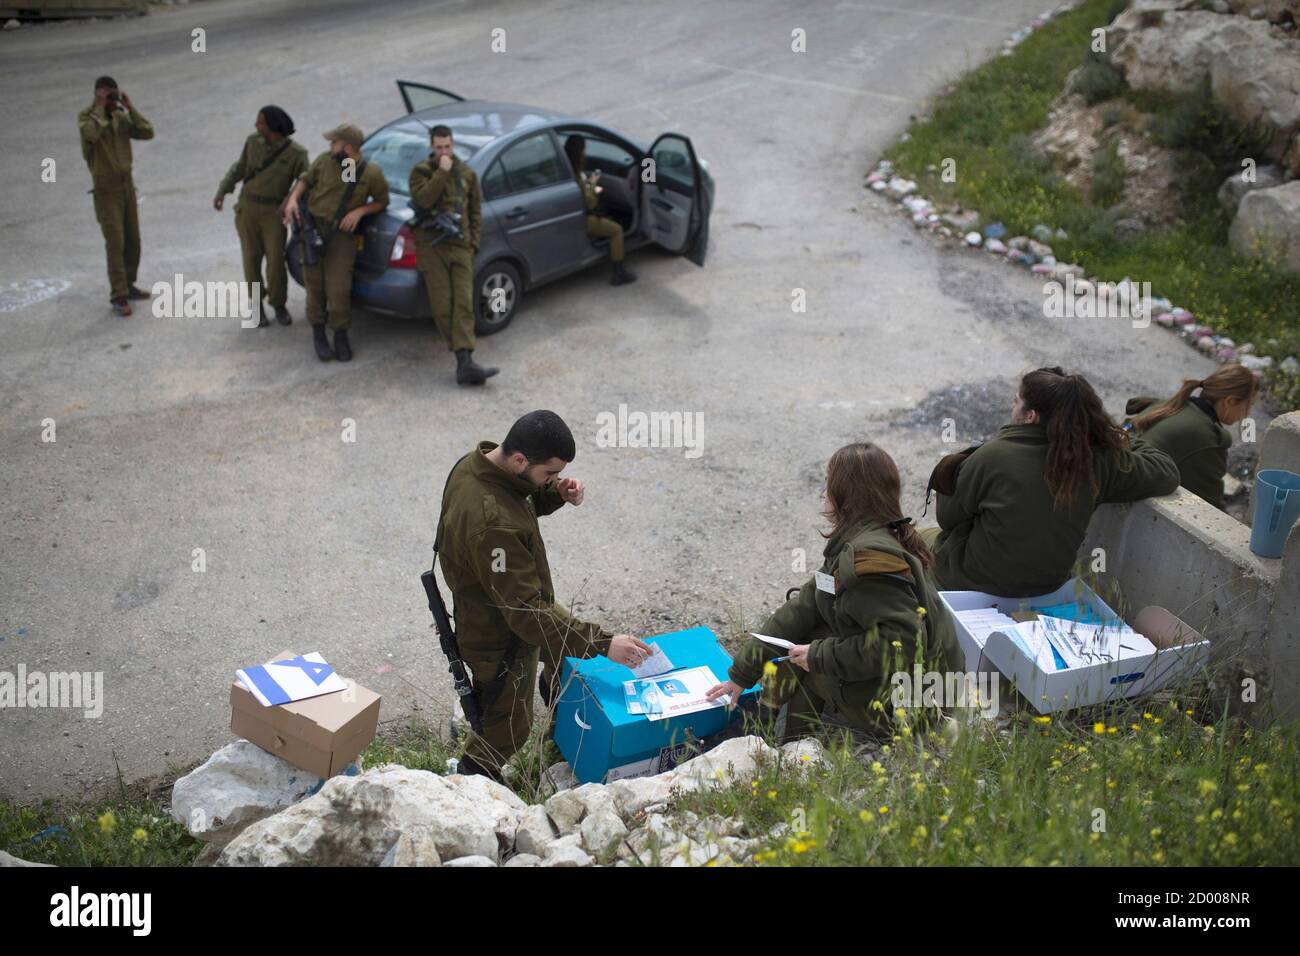 An Israeli soldier casts his ballot for the parliamentary election in a  mobile ballot box at an army base on Mount Gerizim, near the West Bank City  of Nablus March 17, 2015.